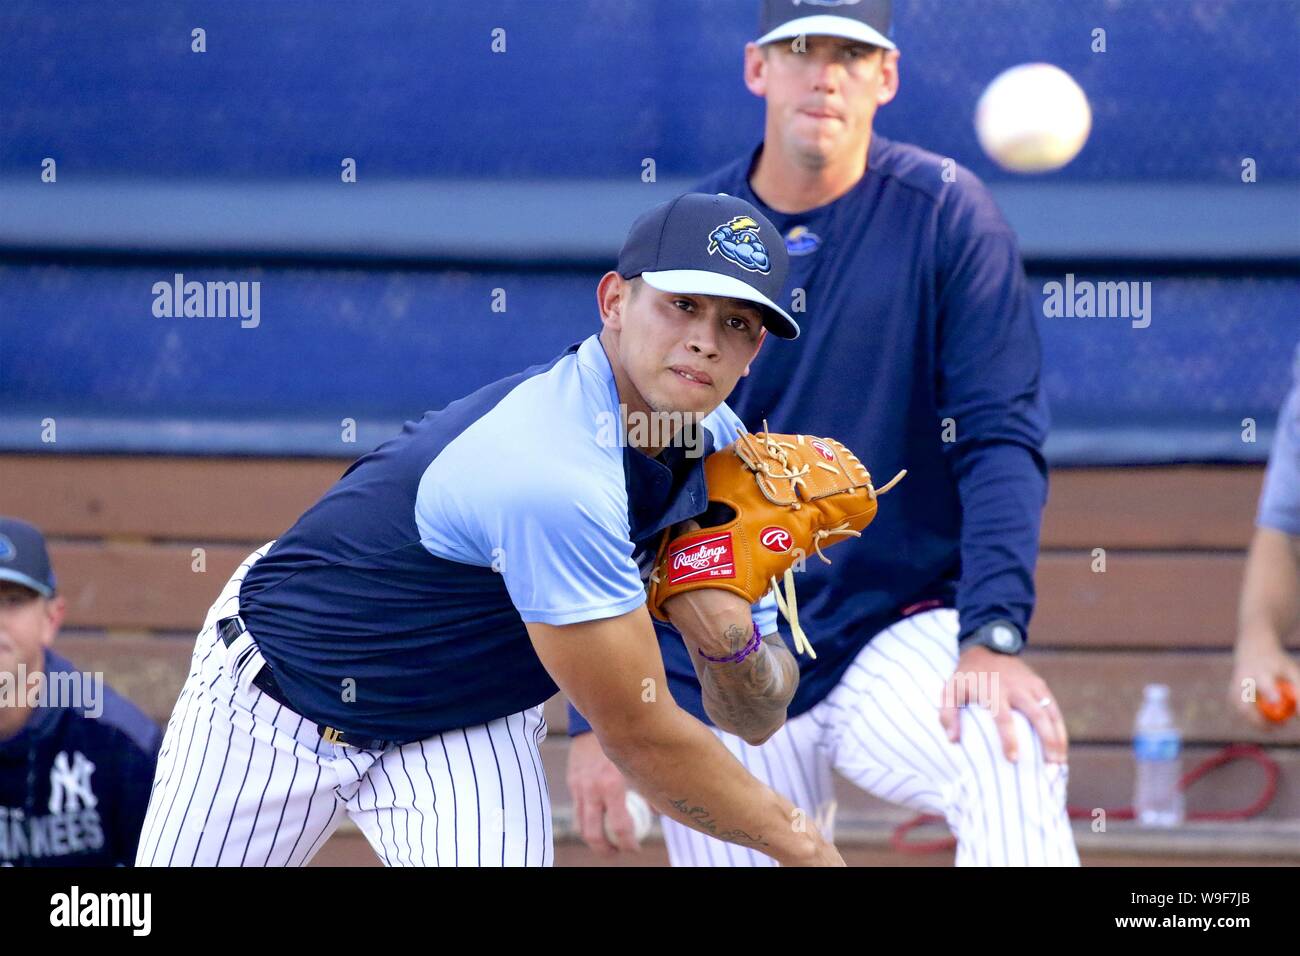 July 30, 2019, Trenton, New Jersey, U.S: New York Yankees pitcher JONATHAN  LOAISIGA, seen here warming up in the bullpen on July 30, 2019 at ARM &  HAMMER Park while he was